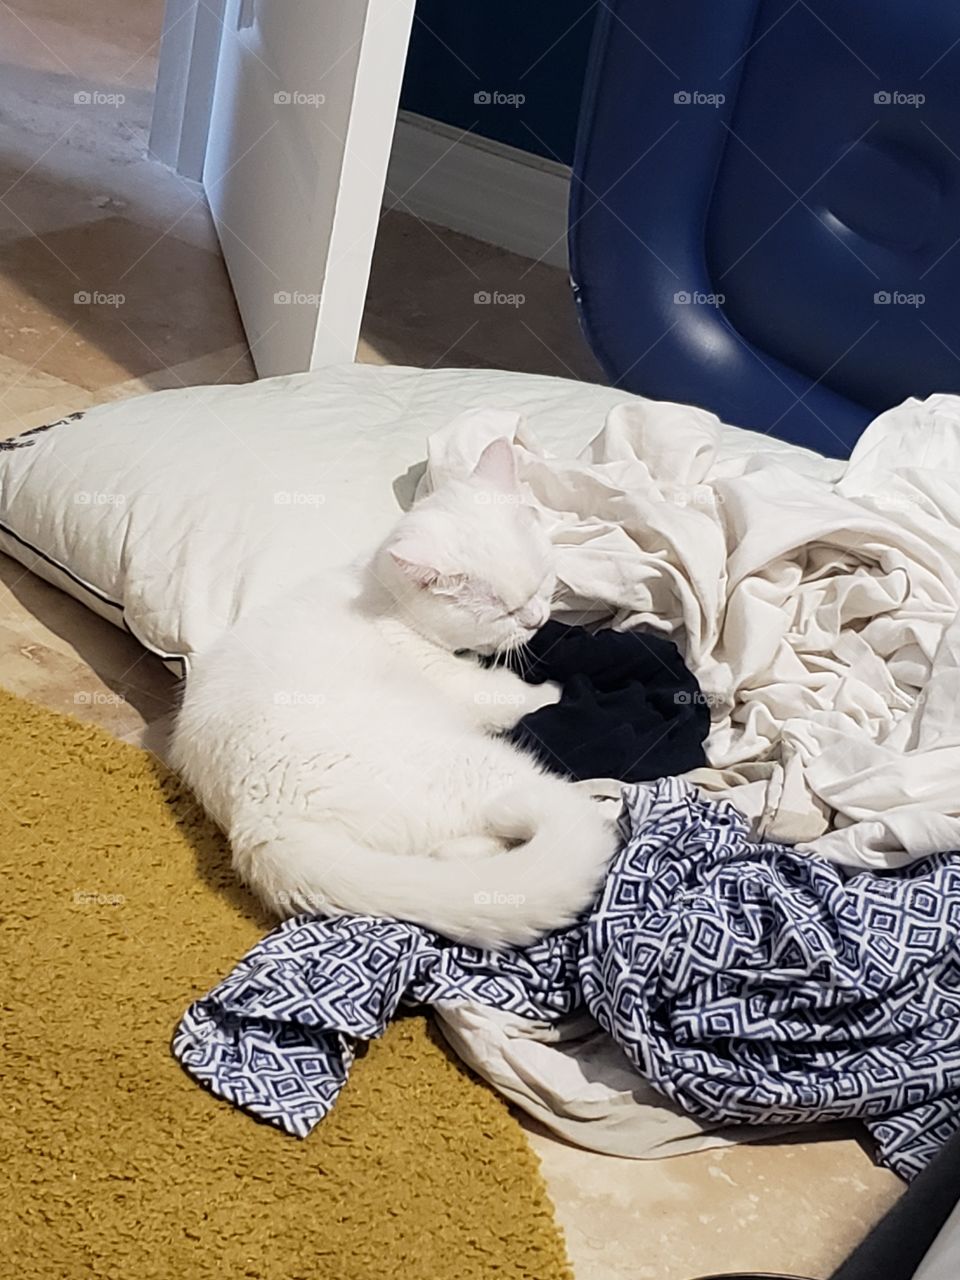 kitty laying on the floor surrounded by clothes